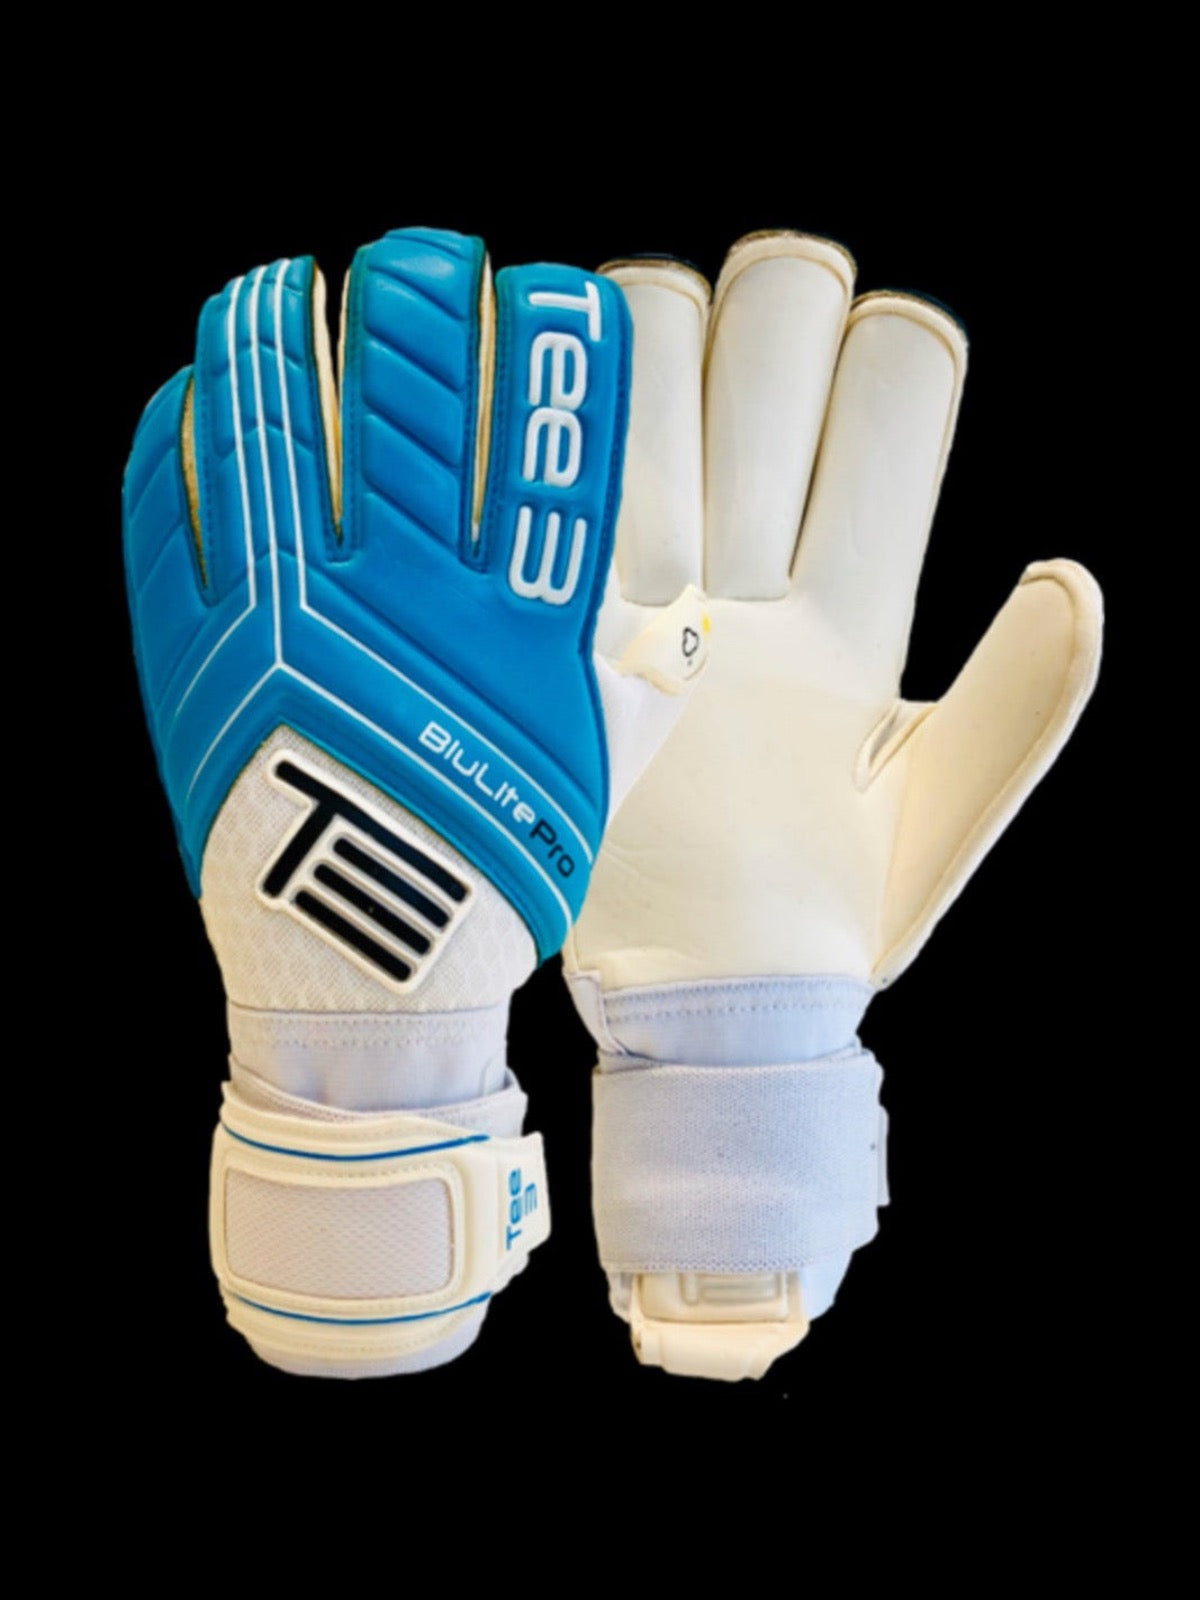 A roll finger goalkeeping glove worn by professional goalkeepers